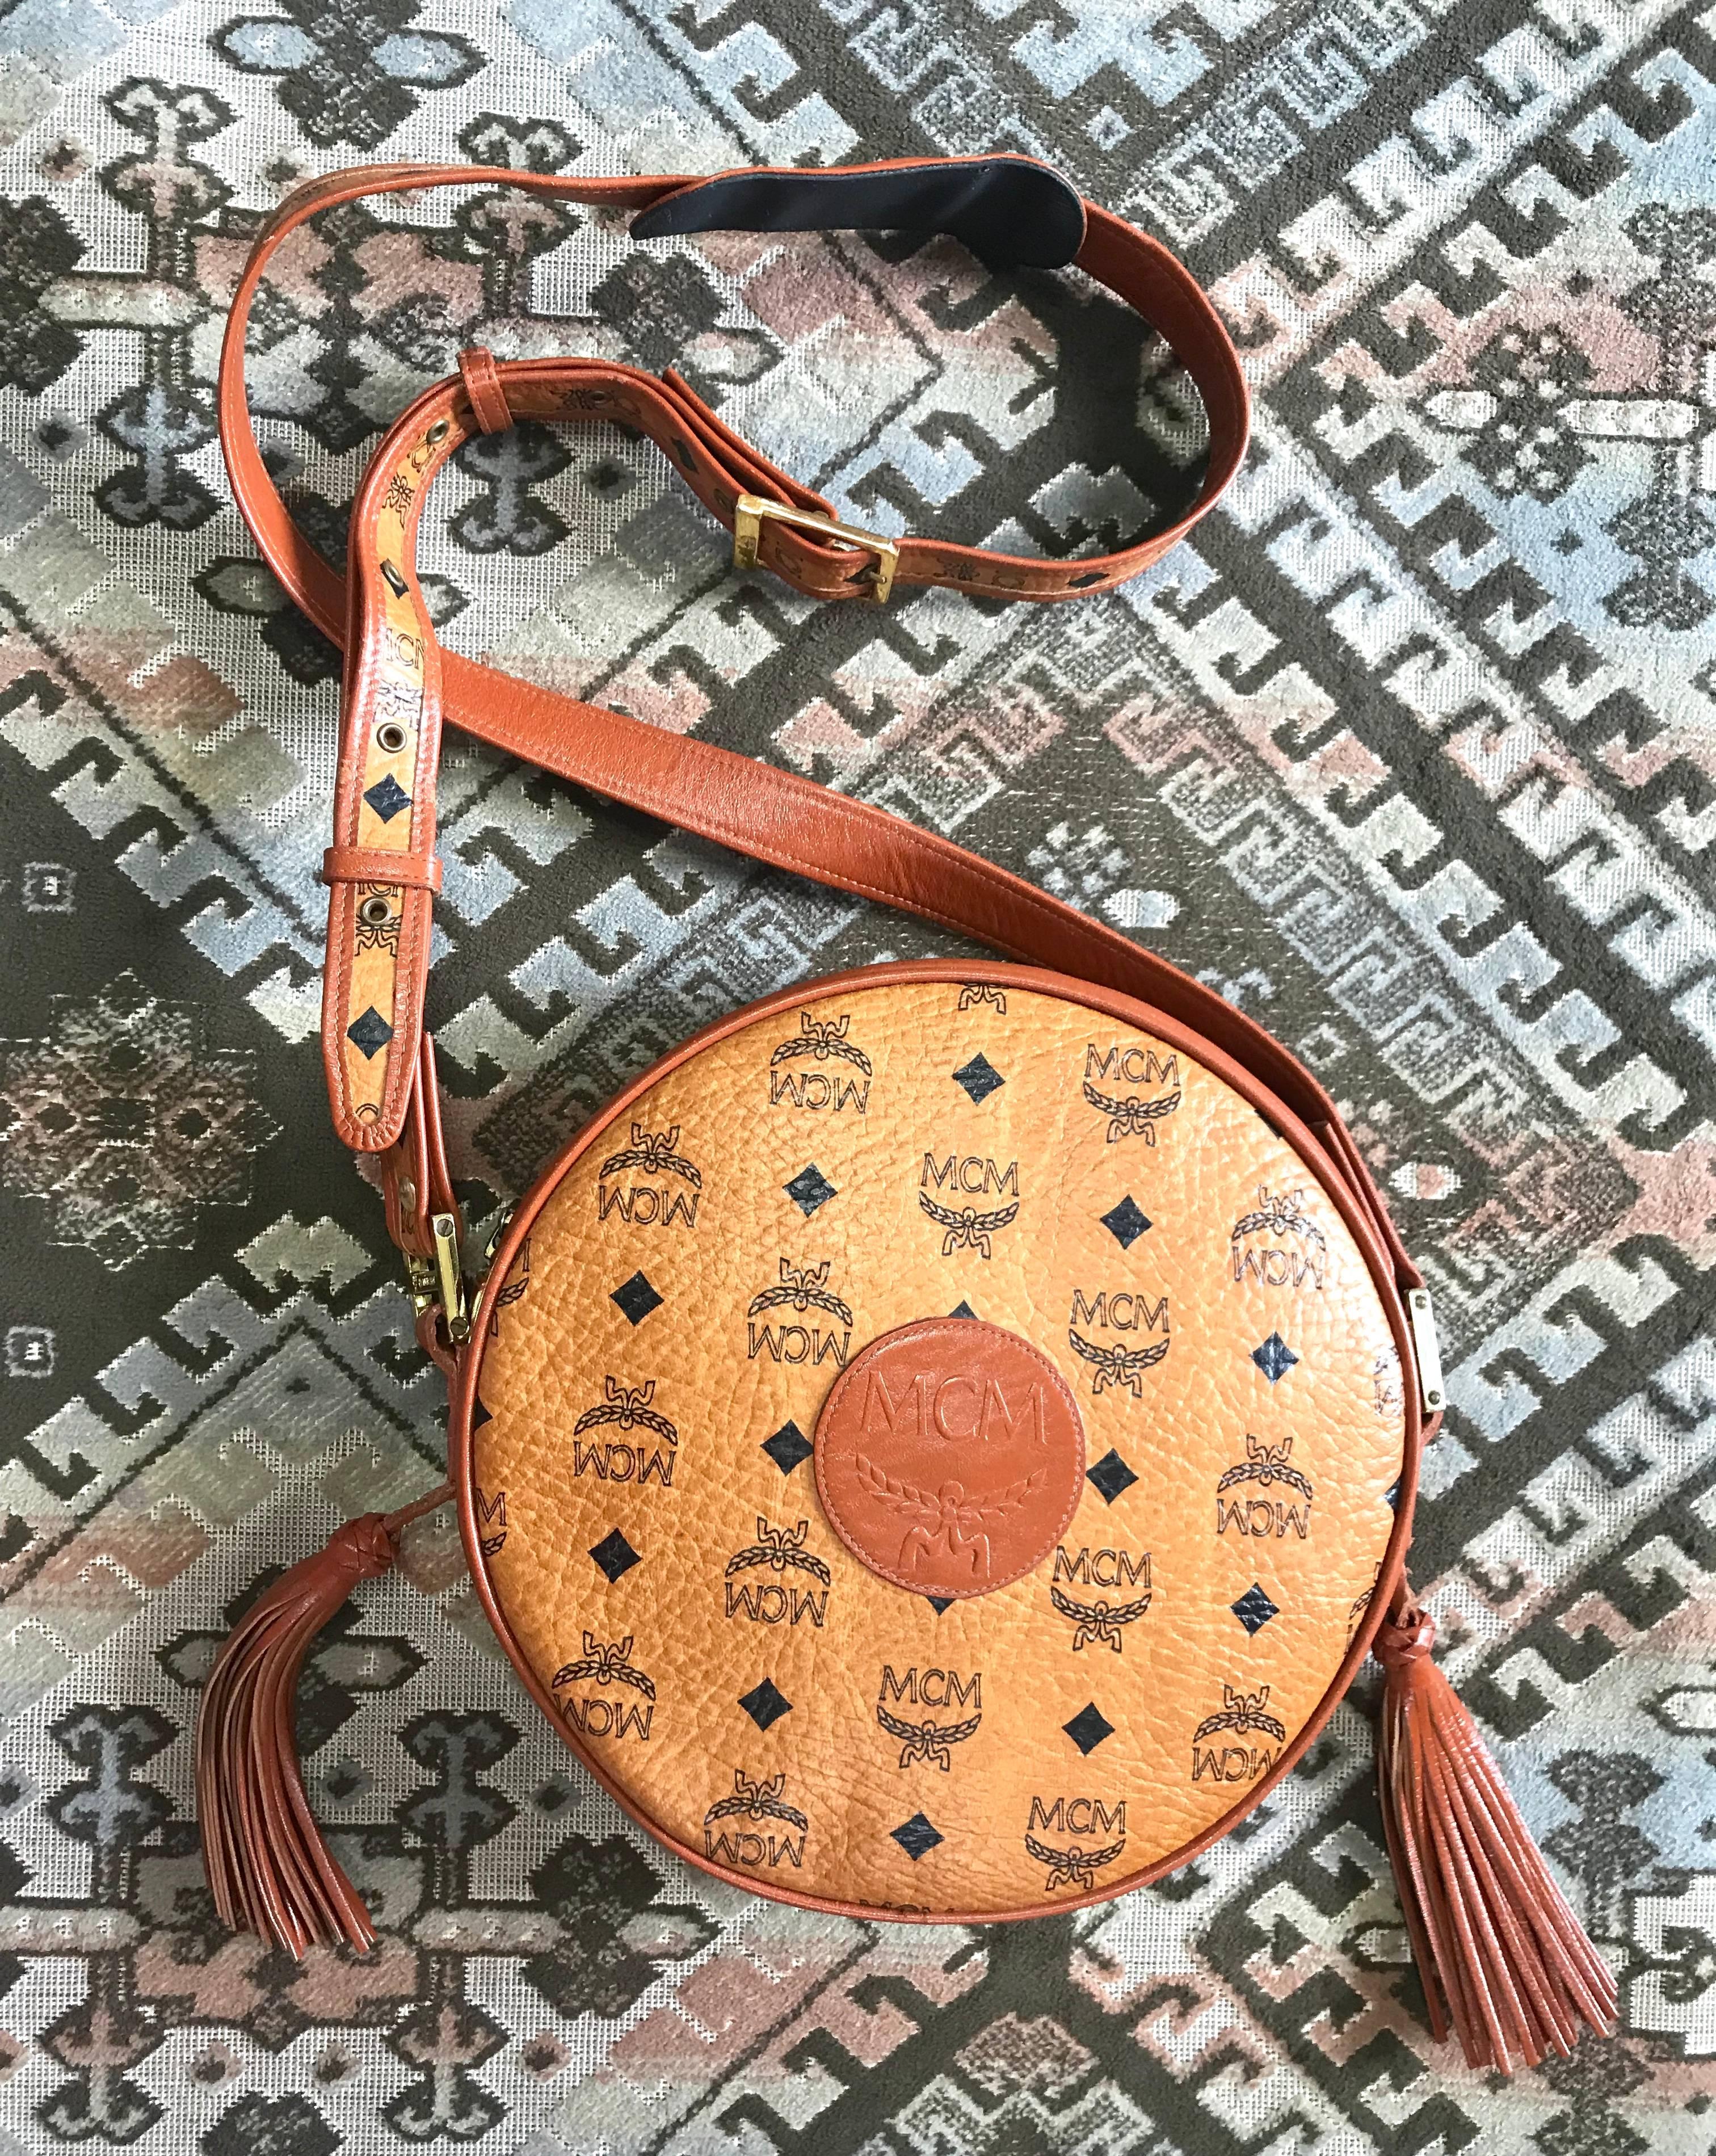 1990s. Vintage MCM brown monogram round Suzy Wong shoulder bag with brown leather trimmings. Designed by Michael Cromer. Masterpiece. Unisex.

MCM has been back in the fashion trend again!!
Now it's considered to be one of the must-have designer in